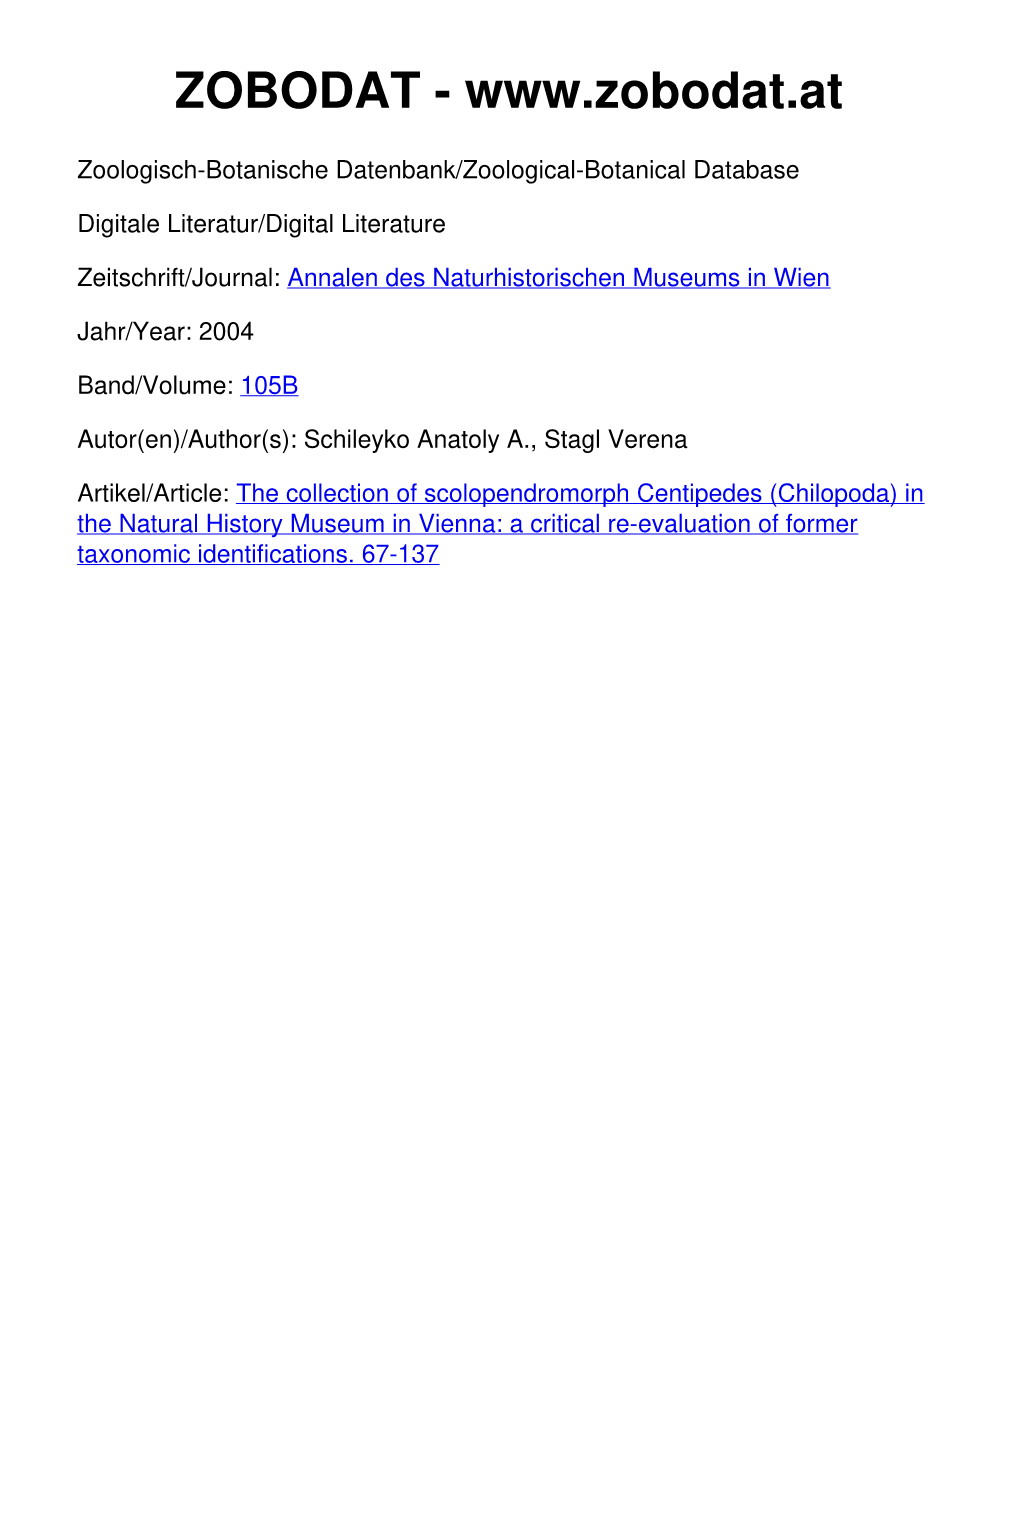 The Collection of Scolopendromorph Centipedes (Chilopoda) in the Natural History Museum in Vienna: a Critical Re-Evaluation of Former Taxonomic Identifications